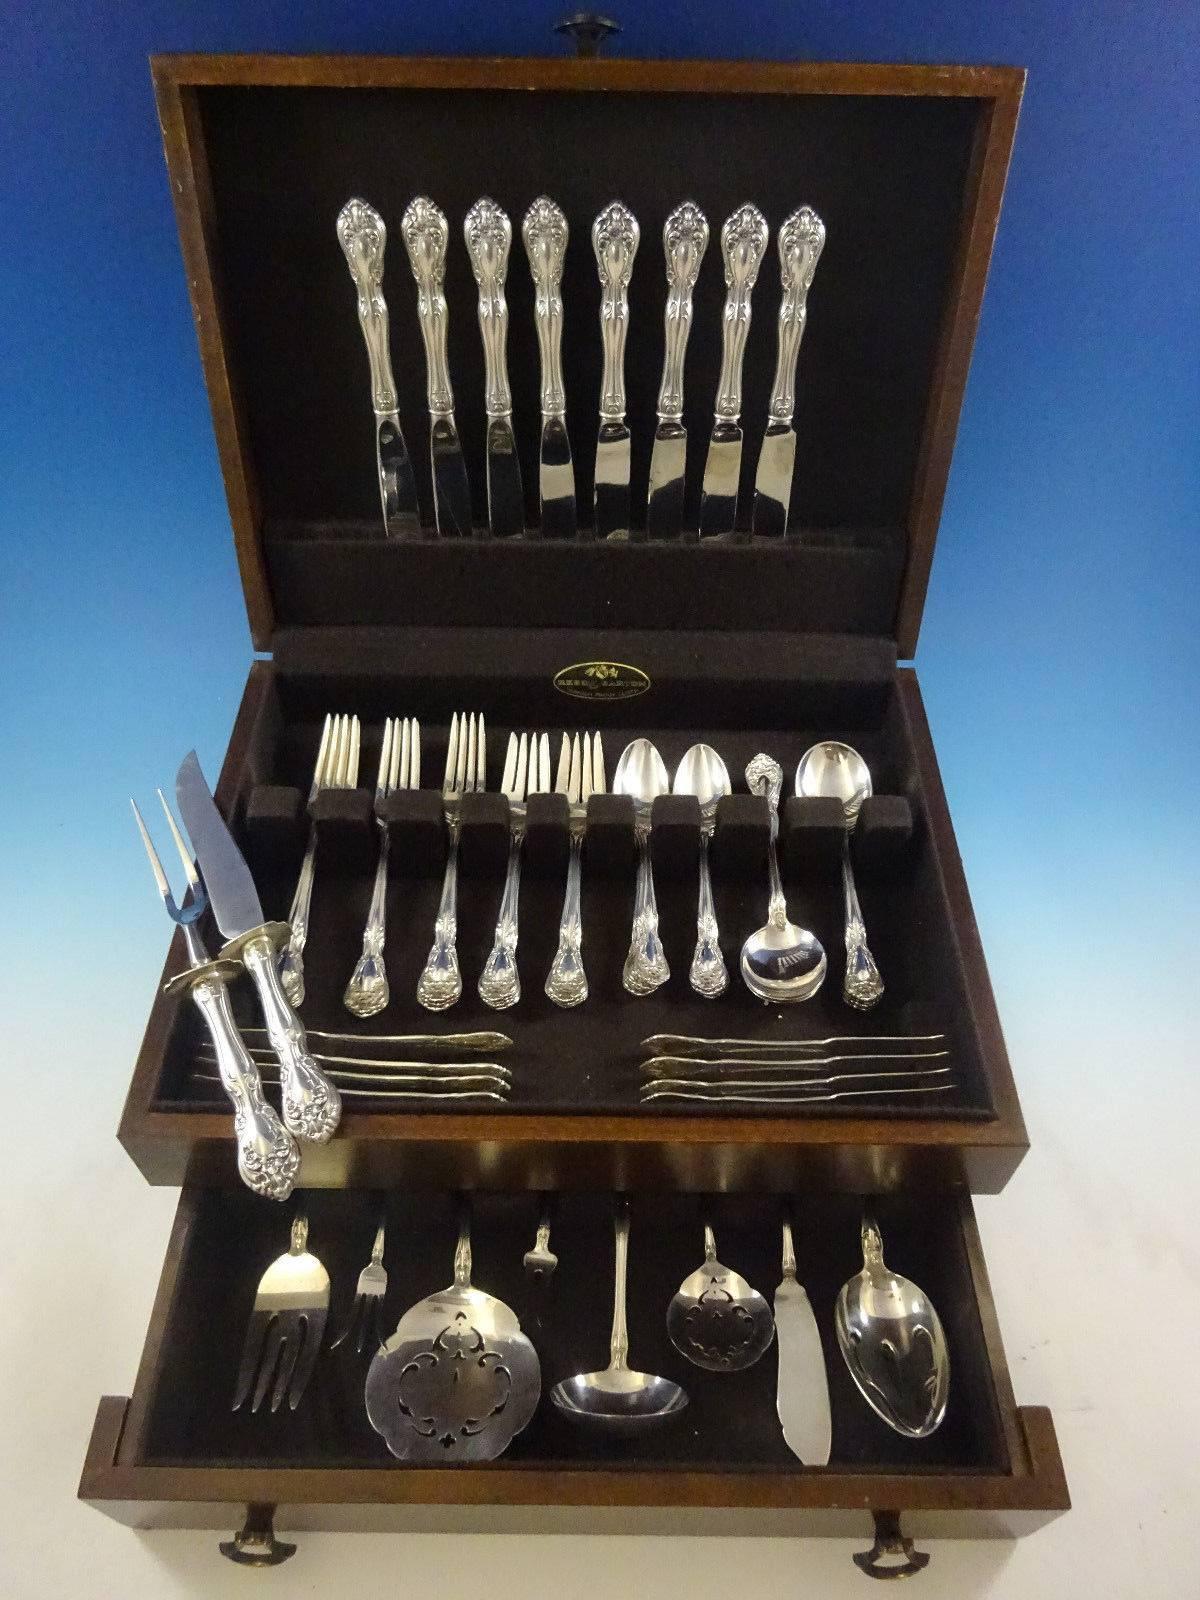 Chateau Rose by Alvin sterling silver flatware set, 60 pieces with many servers. This set includes: 

Eight knives, 8 7/8